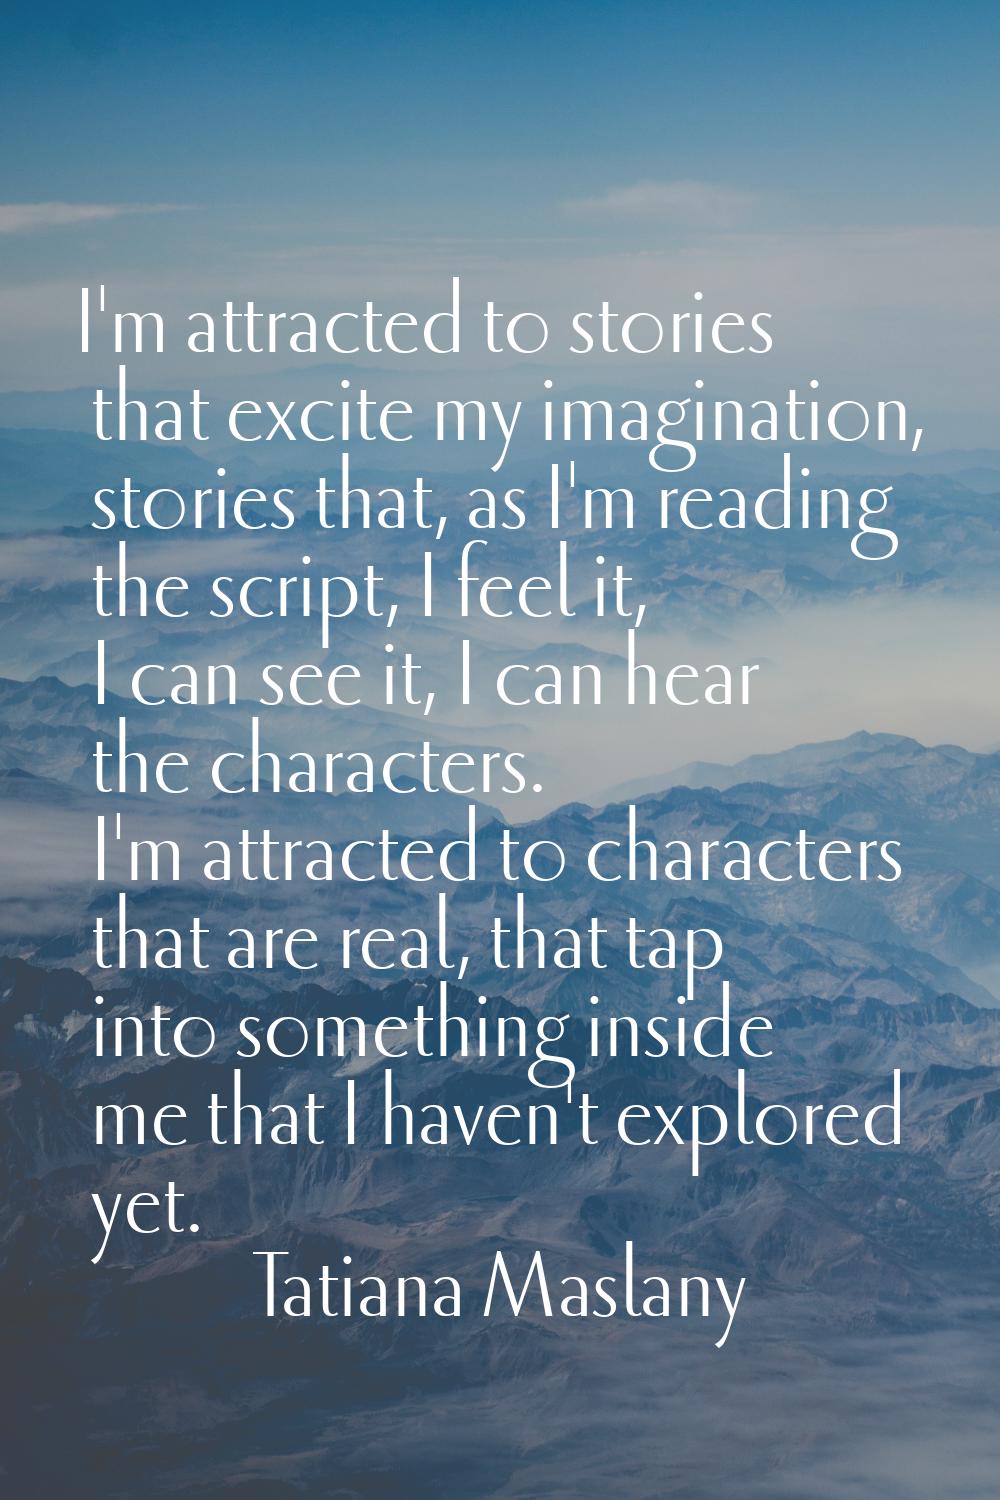 I'm attracted to stories that excite my imagination, stories that, as I'm reading the script, I fee